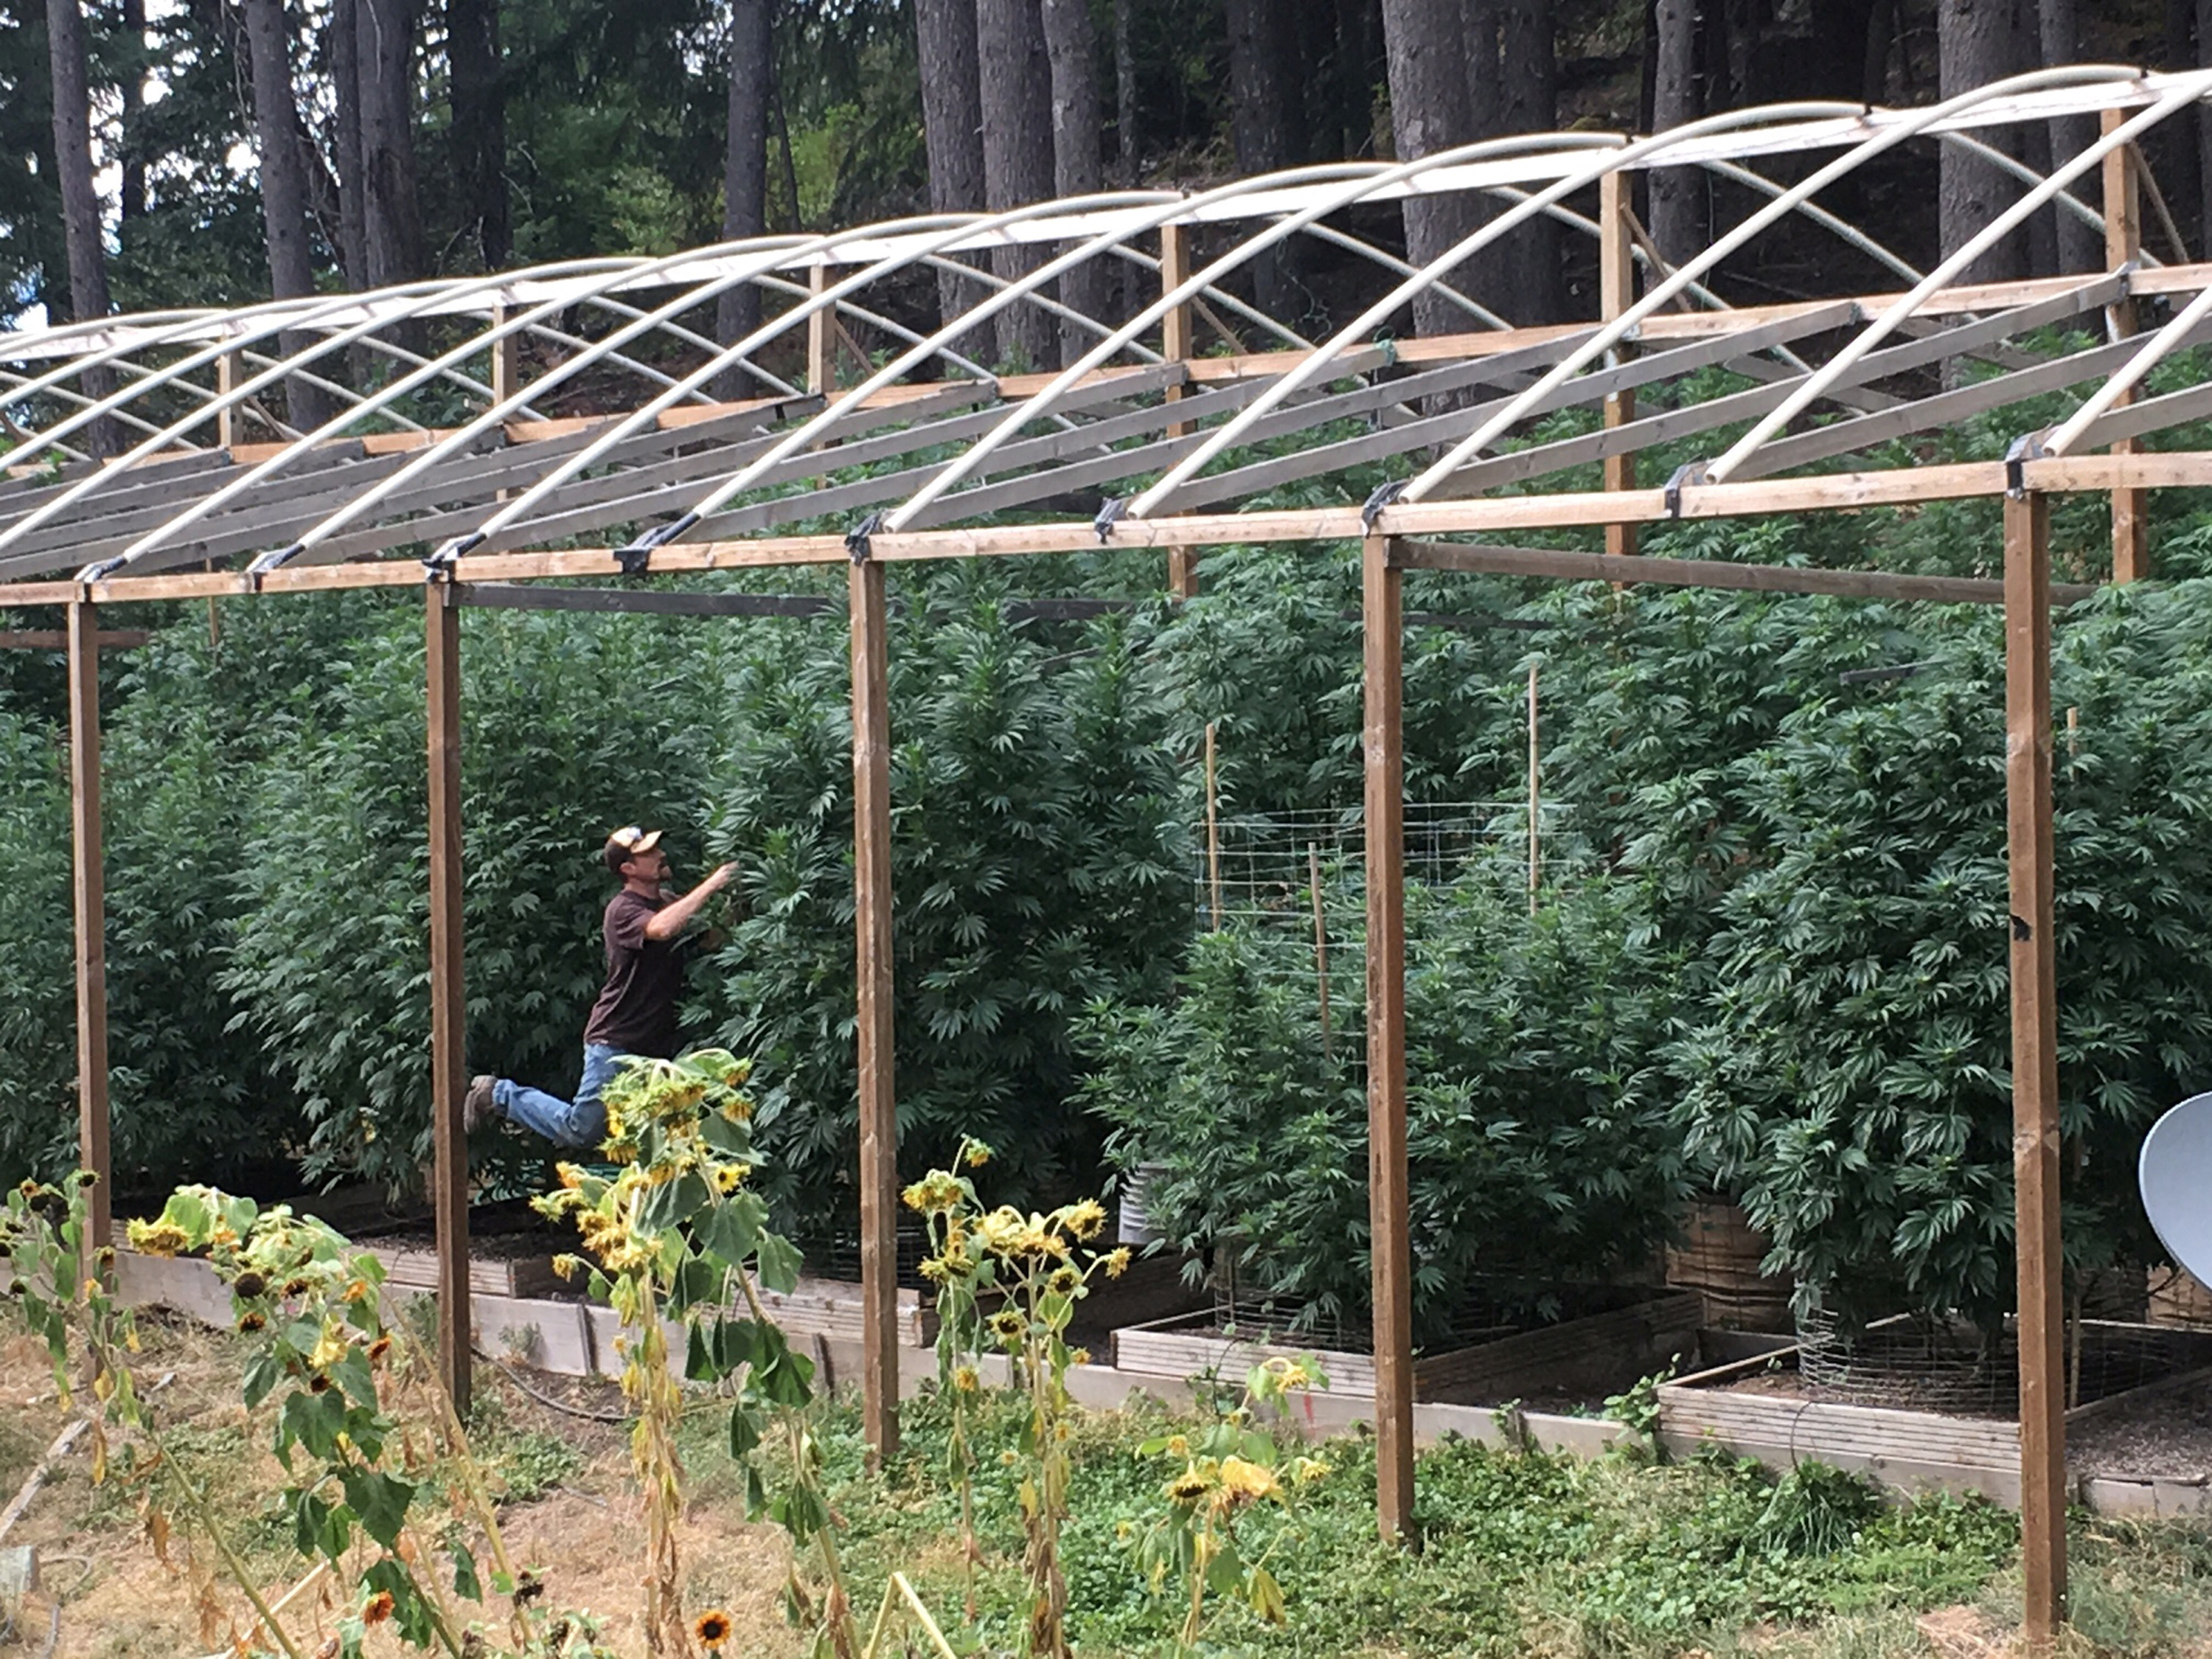 Cannabis grower Steve Dillon tends to his plants on his farm in Humboldt County, California